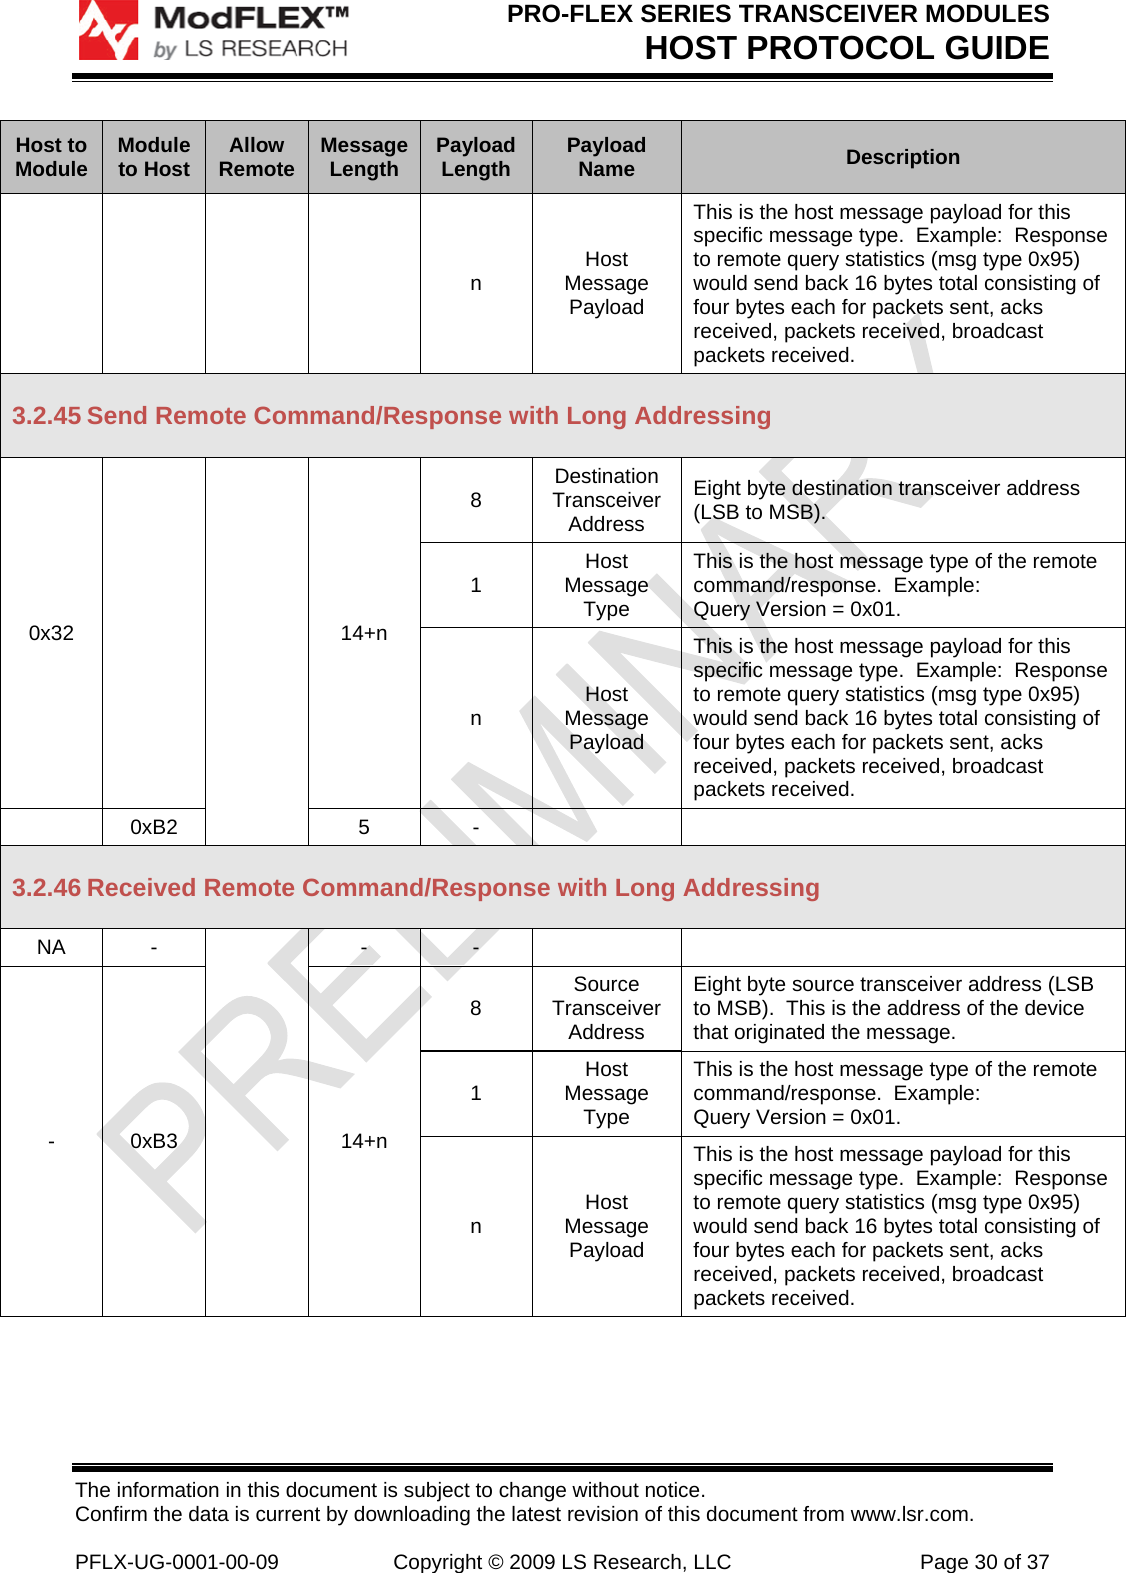 PRO-FLEX SERIES TRANSCEIVER MODULES HOST PROTOCOL GUIDE The information in this document is subject to change without notice. Confirm the data is current by downloading the latest revision of this document from www.lsr.com.  PFLX-UG-0001-00-09  Copyright © 2009 LS Research, LLC  Page 30 of 37 Host to Module  Module to Host  Allow Remote  Message Length  Payload Length  Payload Name  Description n  Host Message Payload This is the host message payload for this specific message type.  Example:  Response to remote query statistics (msg type 0x95) would send back 16 bytes total consisting of four bytes each for packets sent, acks received, packets received, broadcast packets received. 3.2.45 Send Remote Command/Response with Long Addressing 0x32    14+n 8  Destination Transceiver Address Eight byte destination transceiver address (LSB to MSB). 1  Host Message Type This is the host message type of the remote command/response.  Example: Query Version = 0x01. n  Host Message Payload This is the host message payload for this specific message type.  Example:  Response to remote query statistics (msg type 0x95) would send back 16 bytes total consisting of four bytes each for packets sent, acks received, packets received, broadcast packets received.  0xB2  5  -     3.2.46 Received Remote Command/Response with Long Addressing NA -  - -    - 0xB3  14+n 8  Source Transceiver Address Eight byte source transceiver address (LSB to MSB).  This is the address of the device that originated the message. 1  Host Message Type This is the host message type of the remote command/response.  Example: Query Version = 0x01. n  Host Message Payload This is the host message payload for this specific message type.  Example:  Response to remote query statistics (msg type 0x95) would send back 16 bytes total consisting of four bytes each for packets sent, acks received, packets received, broadcast packets received. 